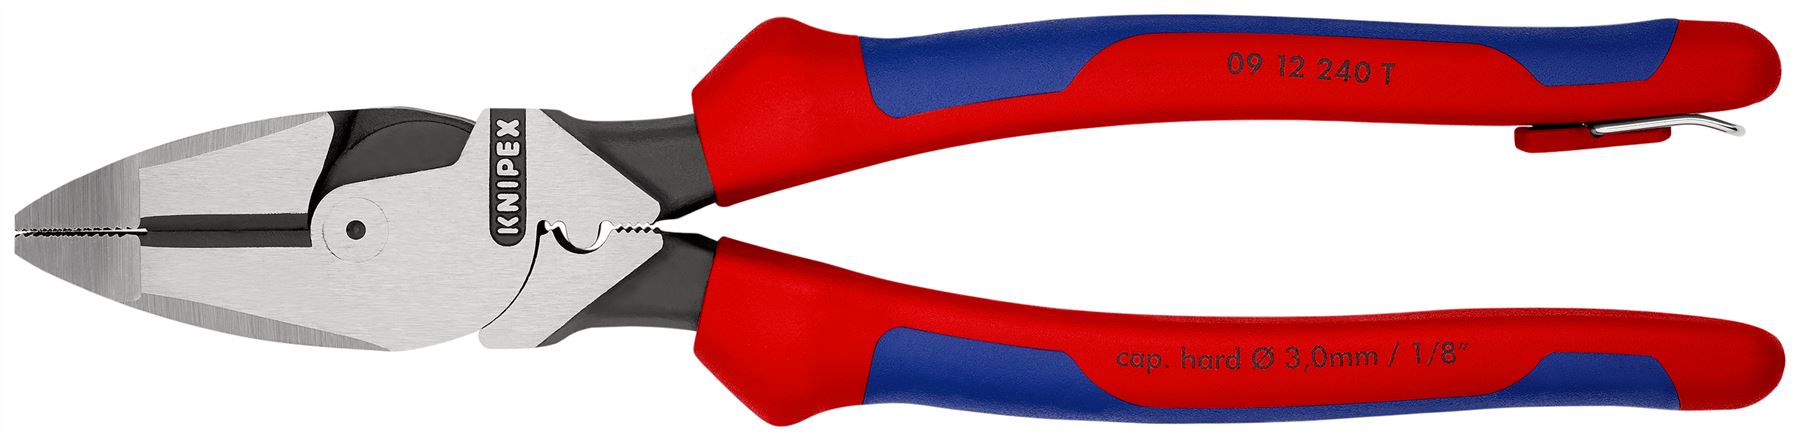 Knipex Linemans Pliers American Style 240mm Slim Multi Component Grips with Tether Point 09 12 240 T